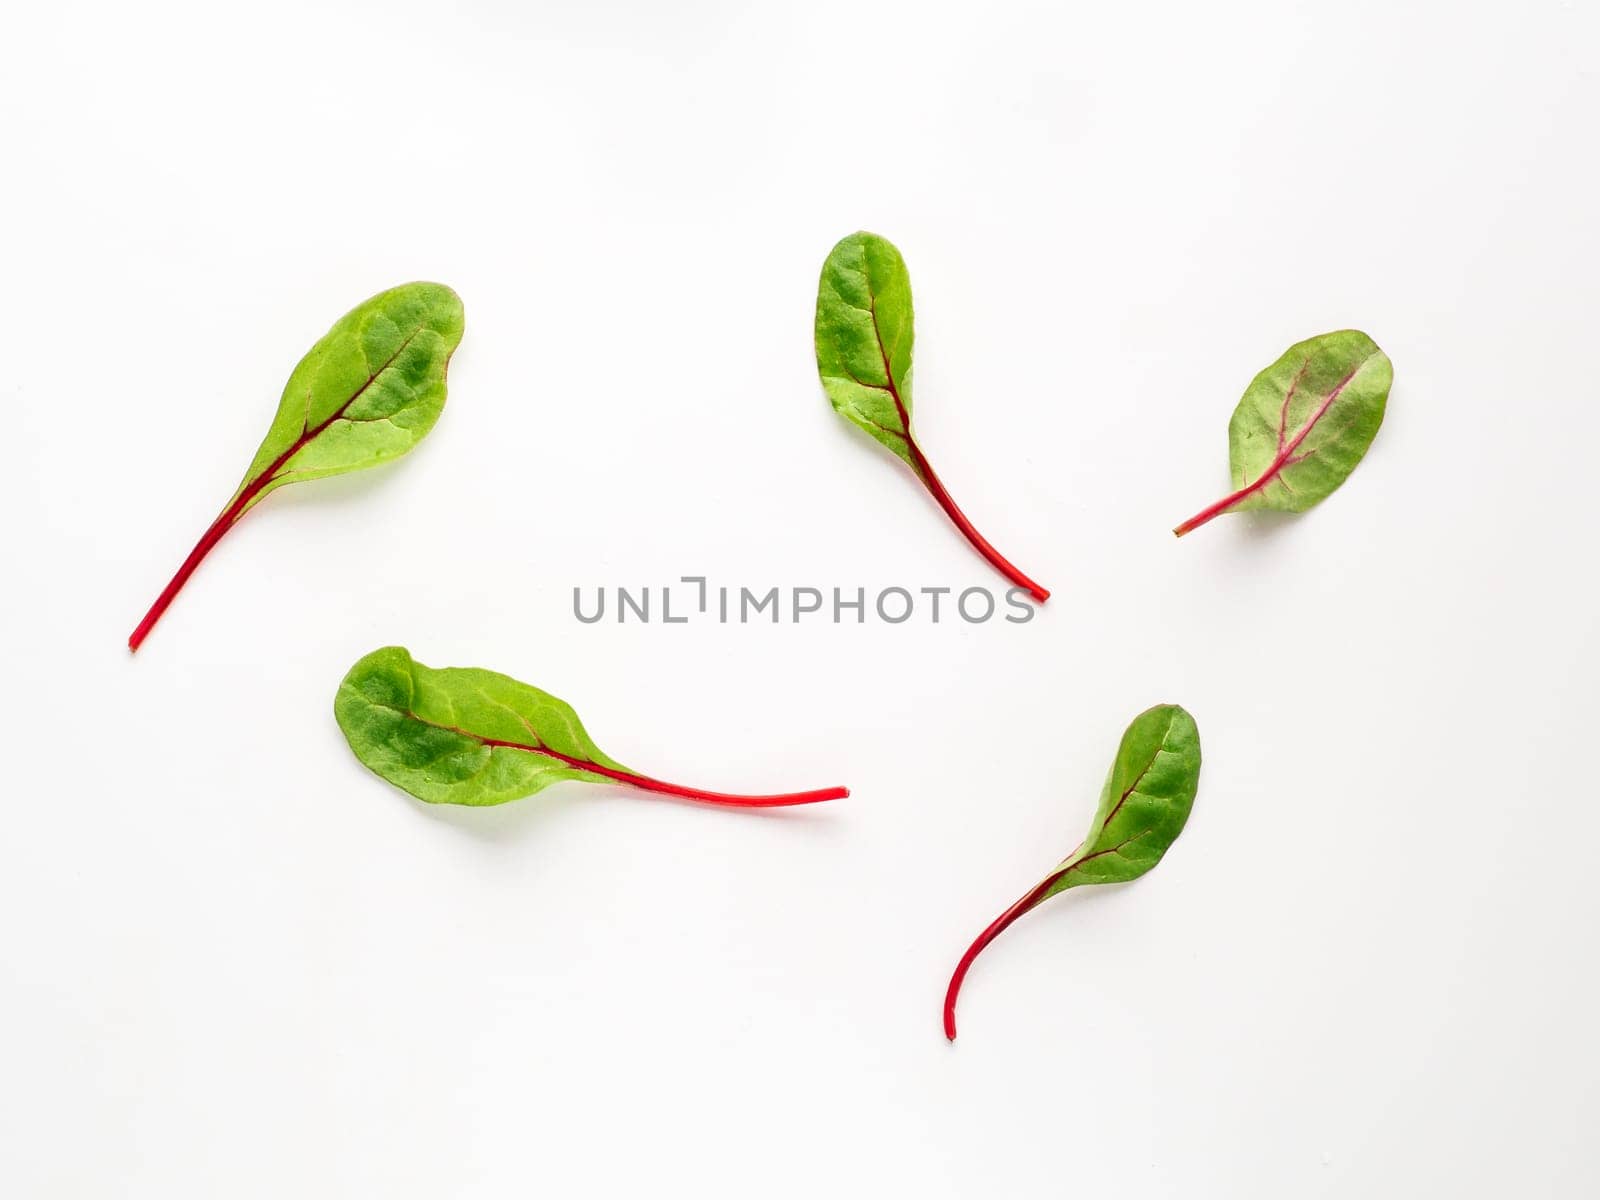 Set of fresh green chard leaves or mangold salad leaves on white background. Flat lay or top view fresh baby beet leaves, isolated on white background with clipping path.